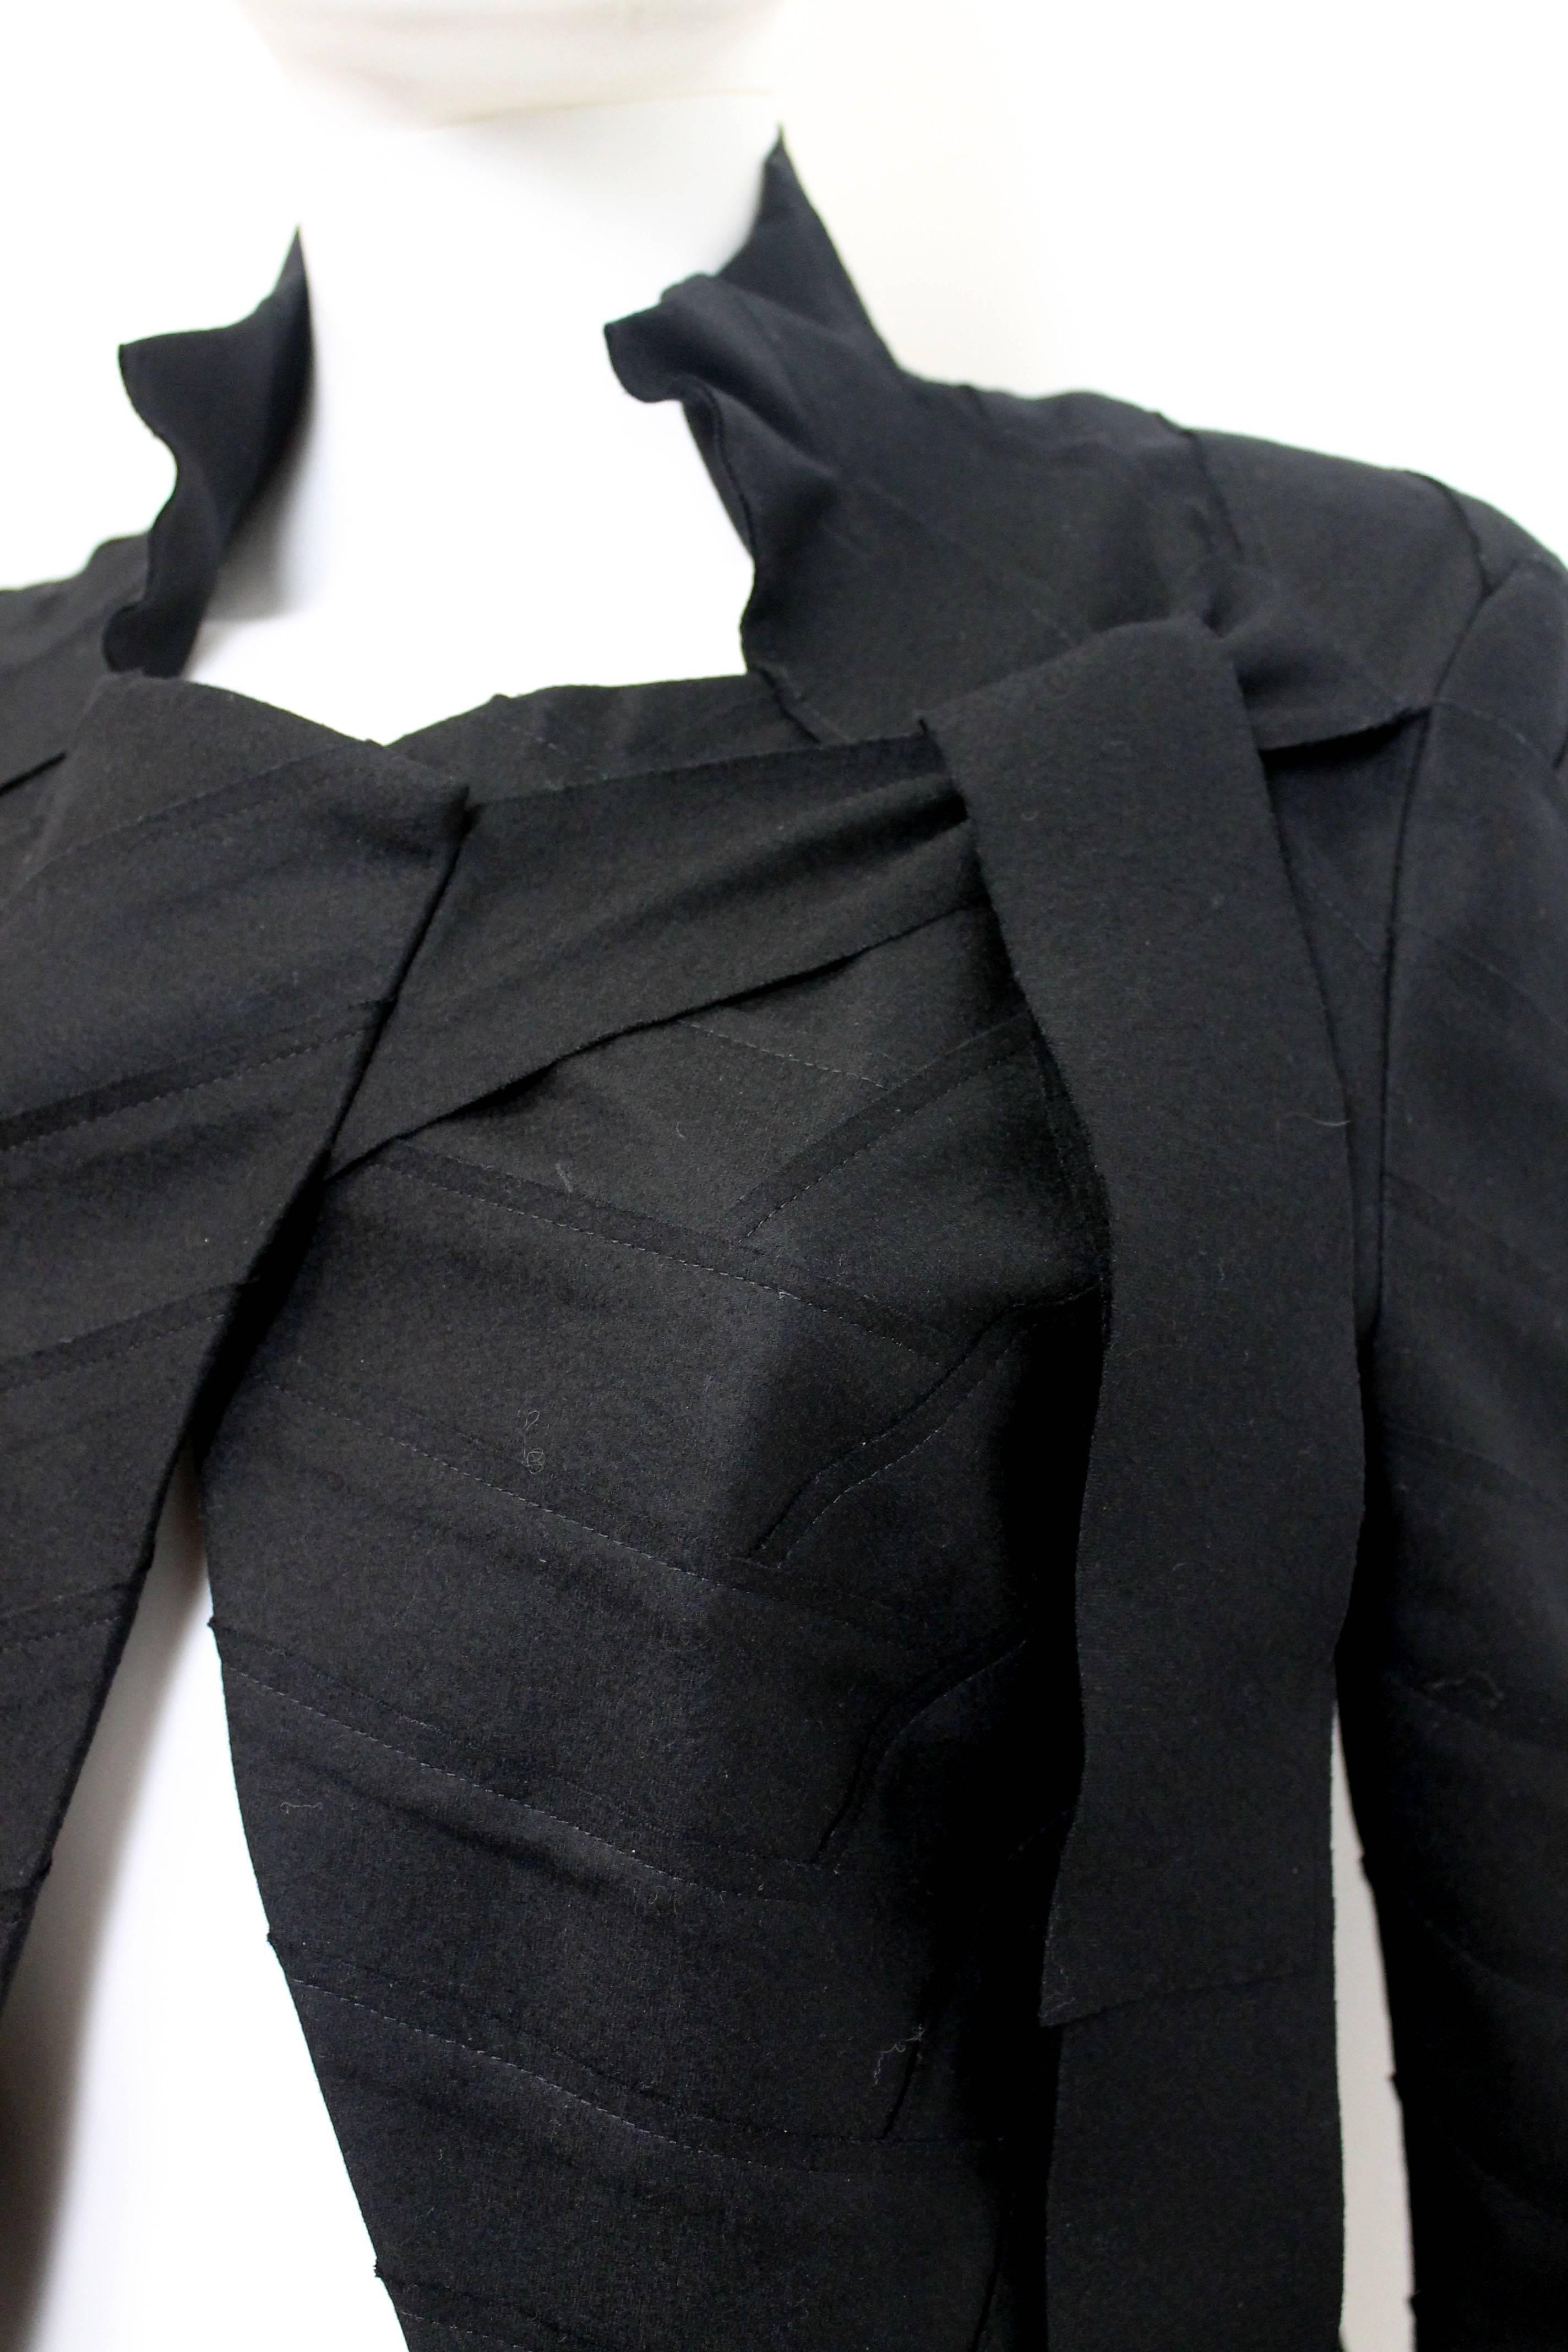 Issey Miyake black chevron panel fitted jacket with asymmetric tie neckline. We believe to be early 2000s in date.

This Issey Miyake black cropped-jacket is made entirely out of chevron shaped interlocking wool patchwork. The jacket is